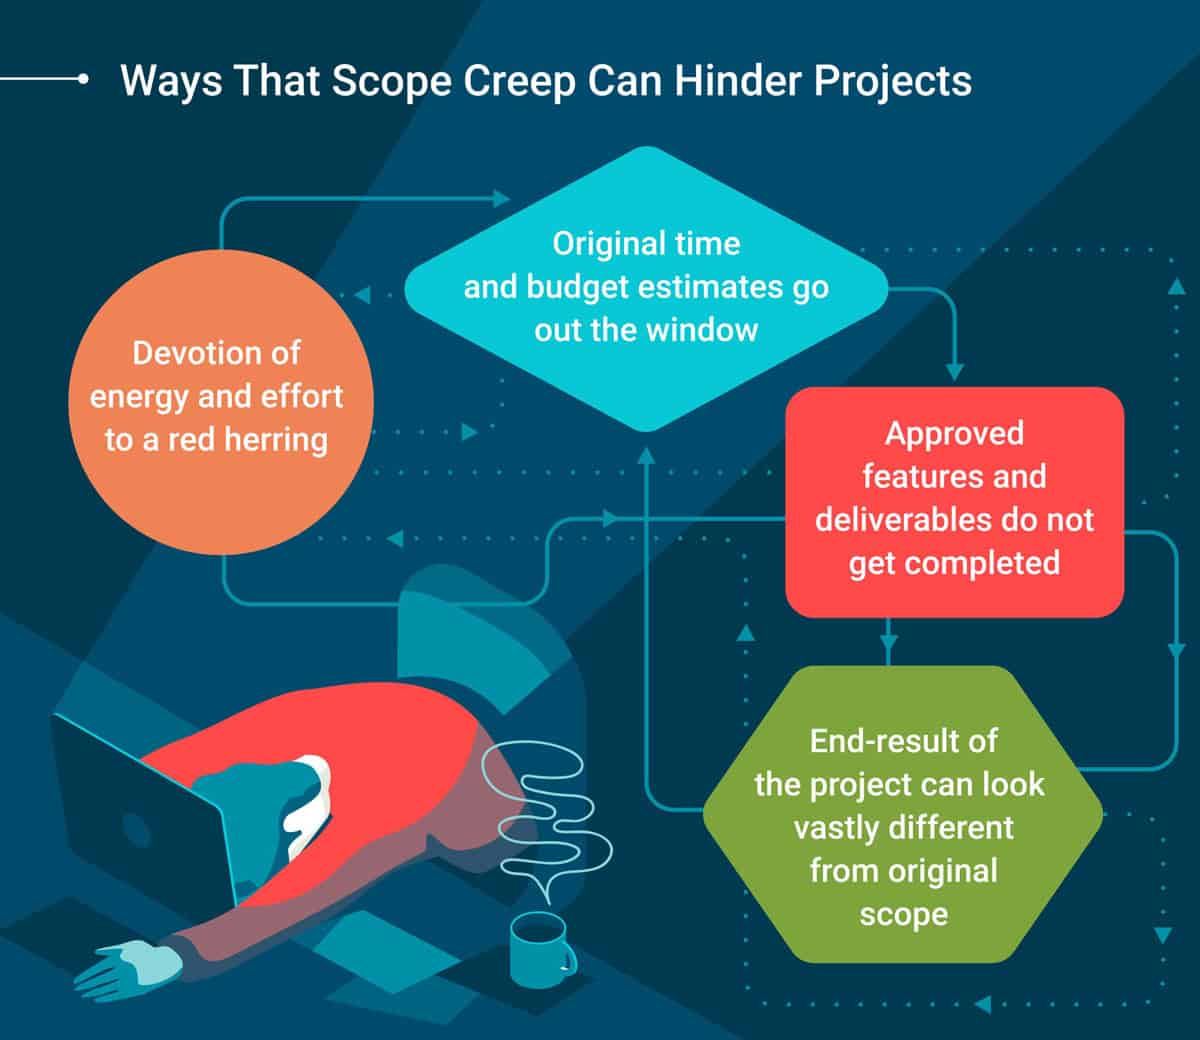 An infographic on the adverse effects of project scope creep by G2.